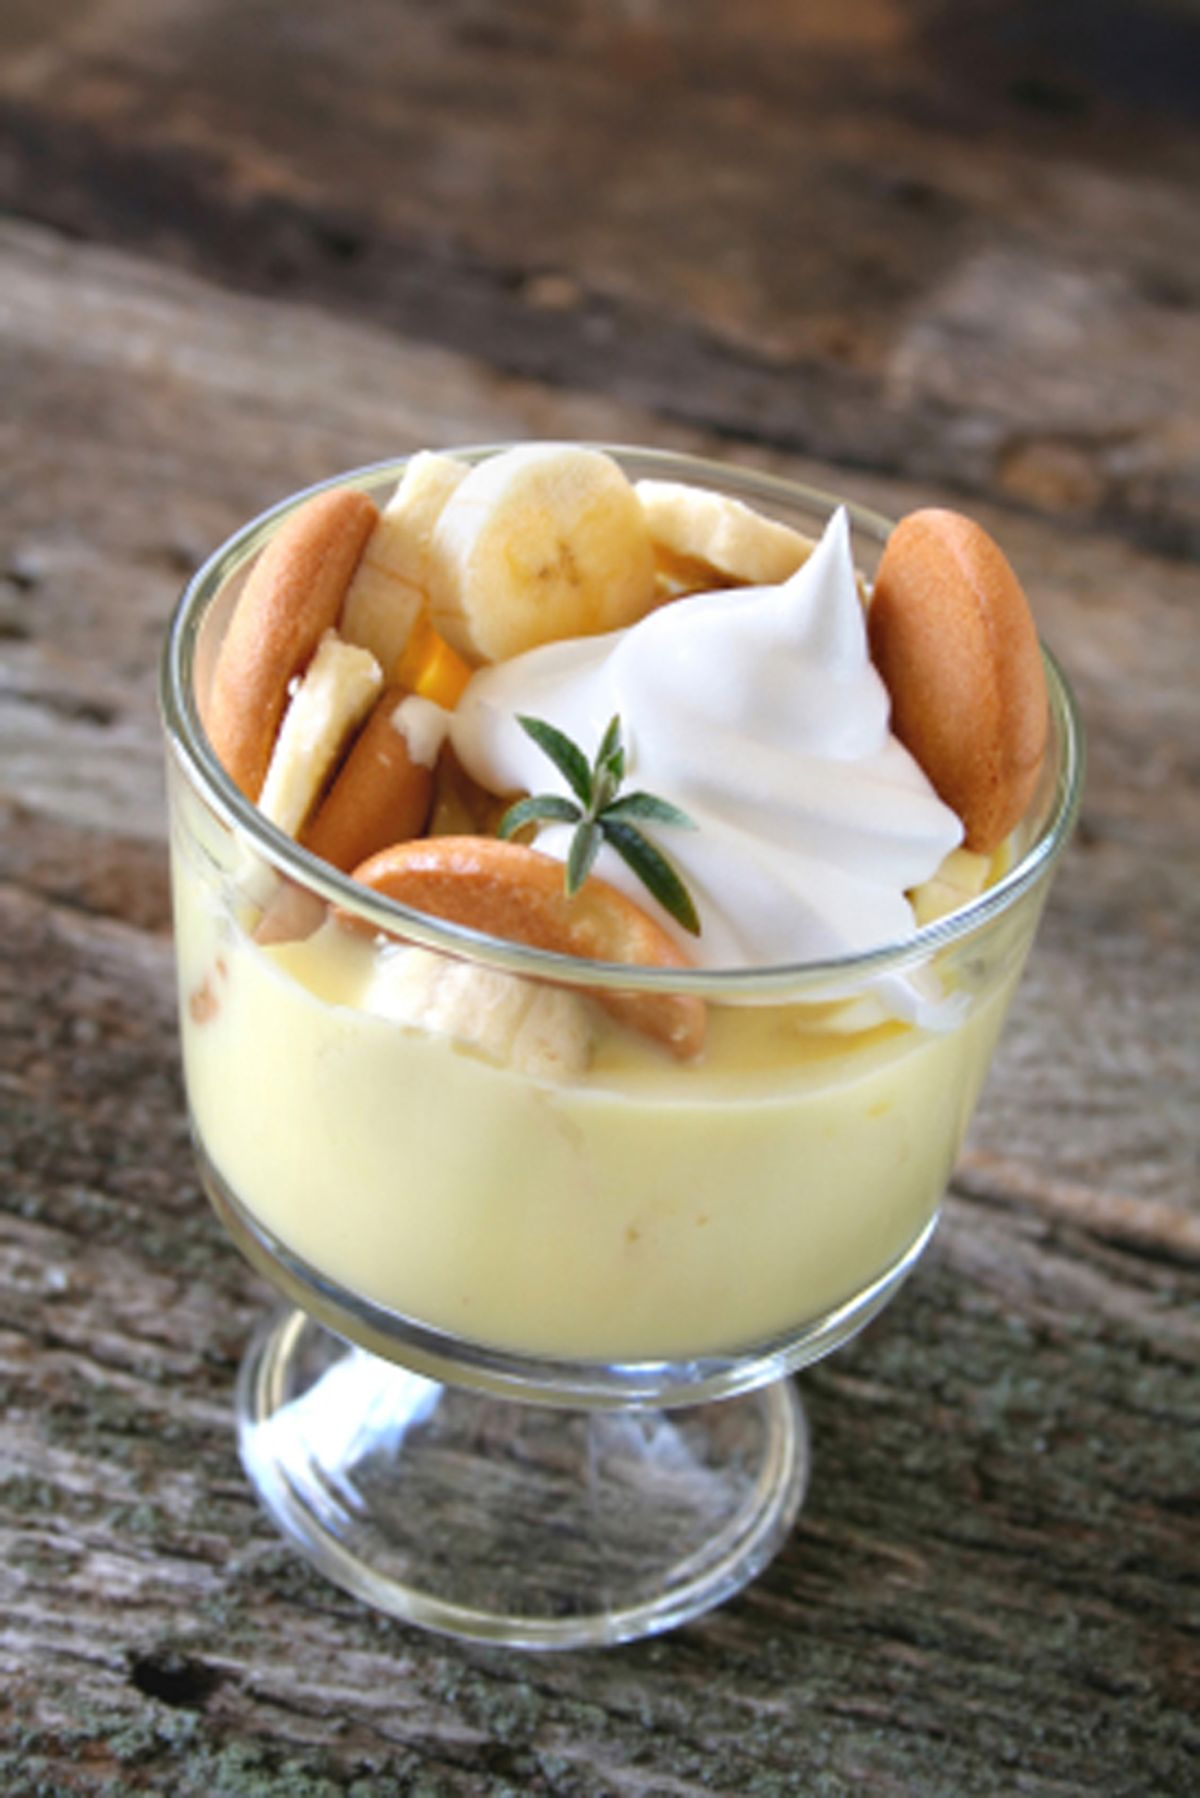 Small dish of banana pudding with wafers and whip topping